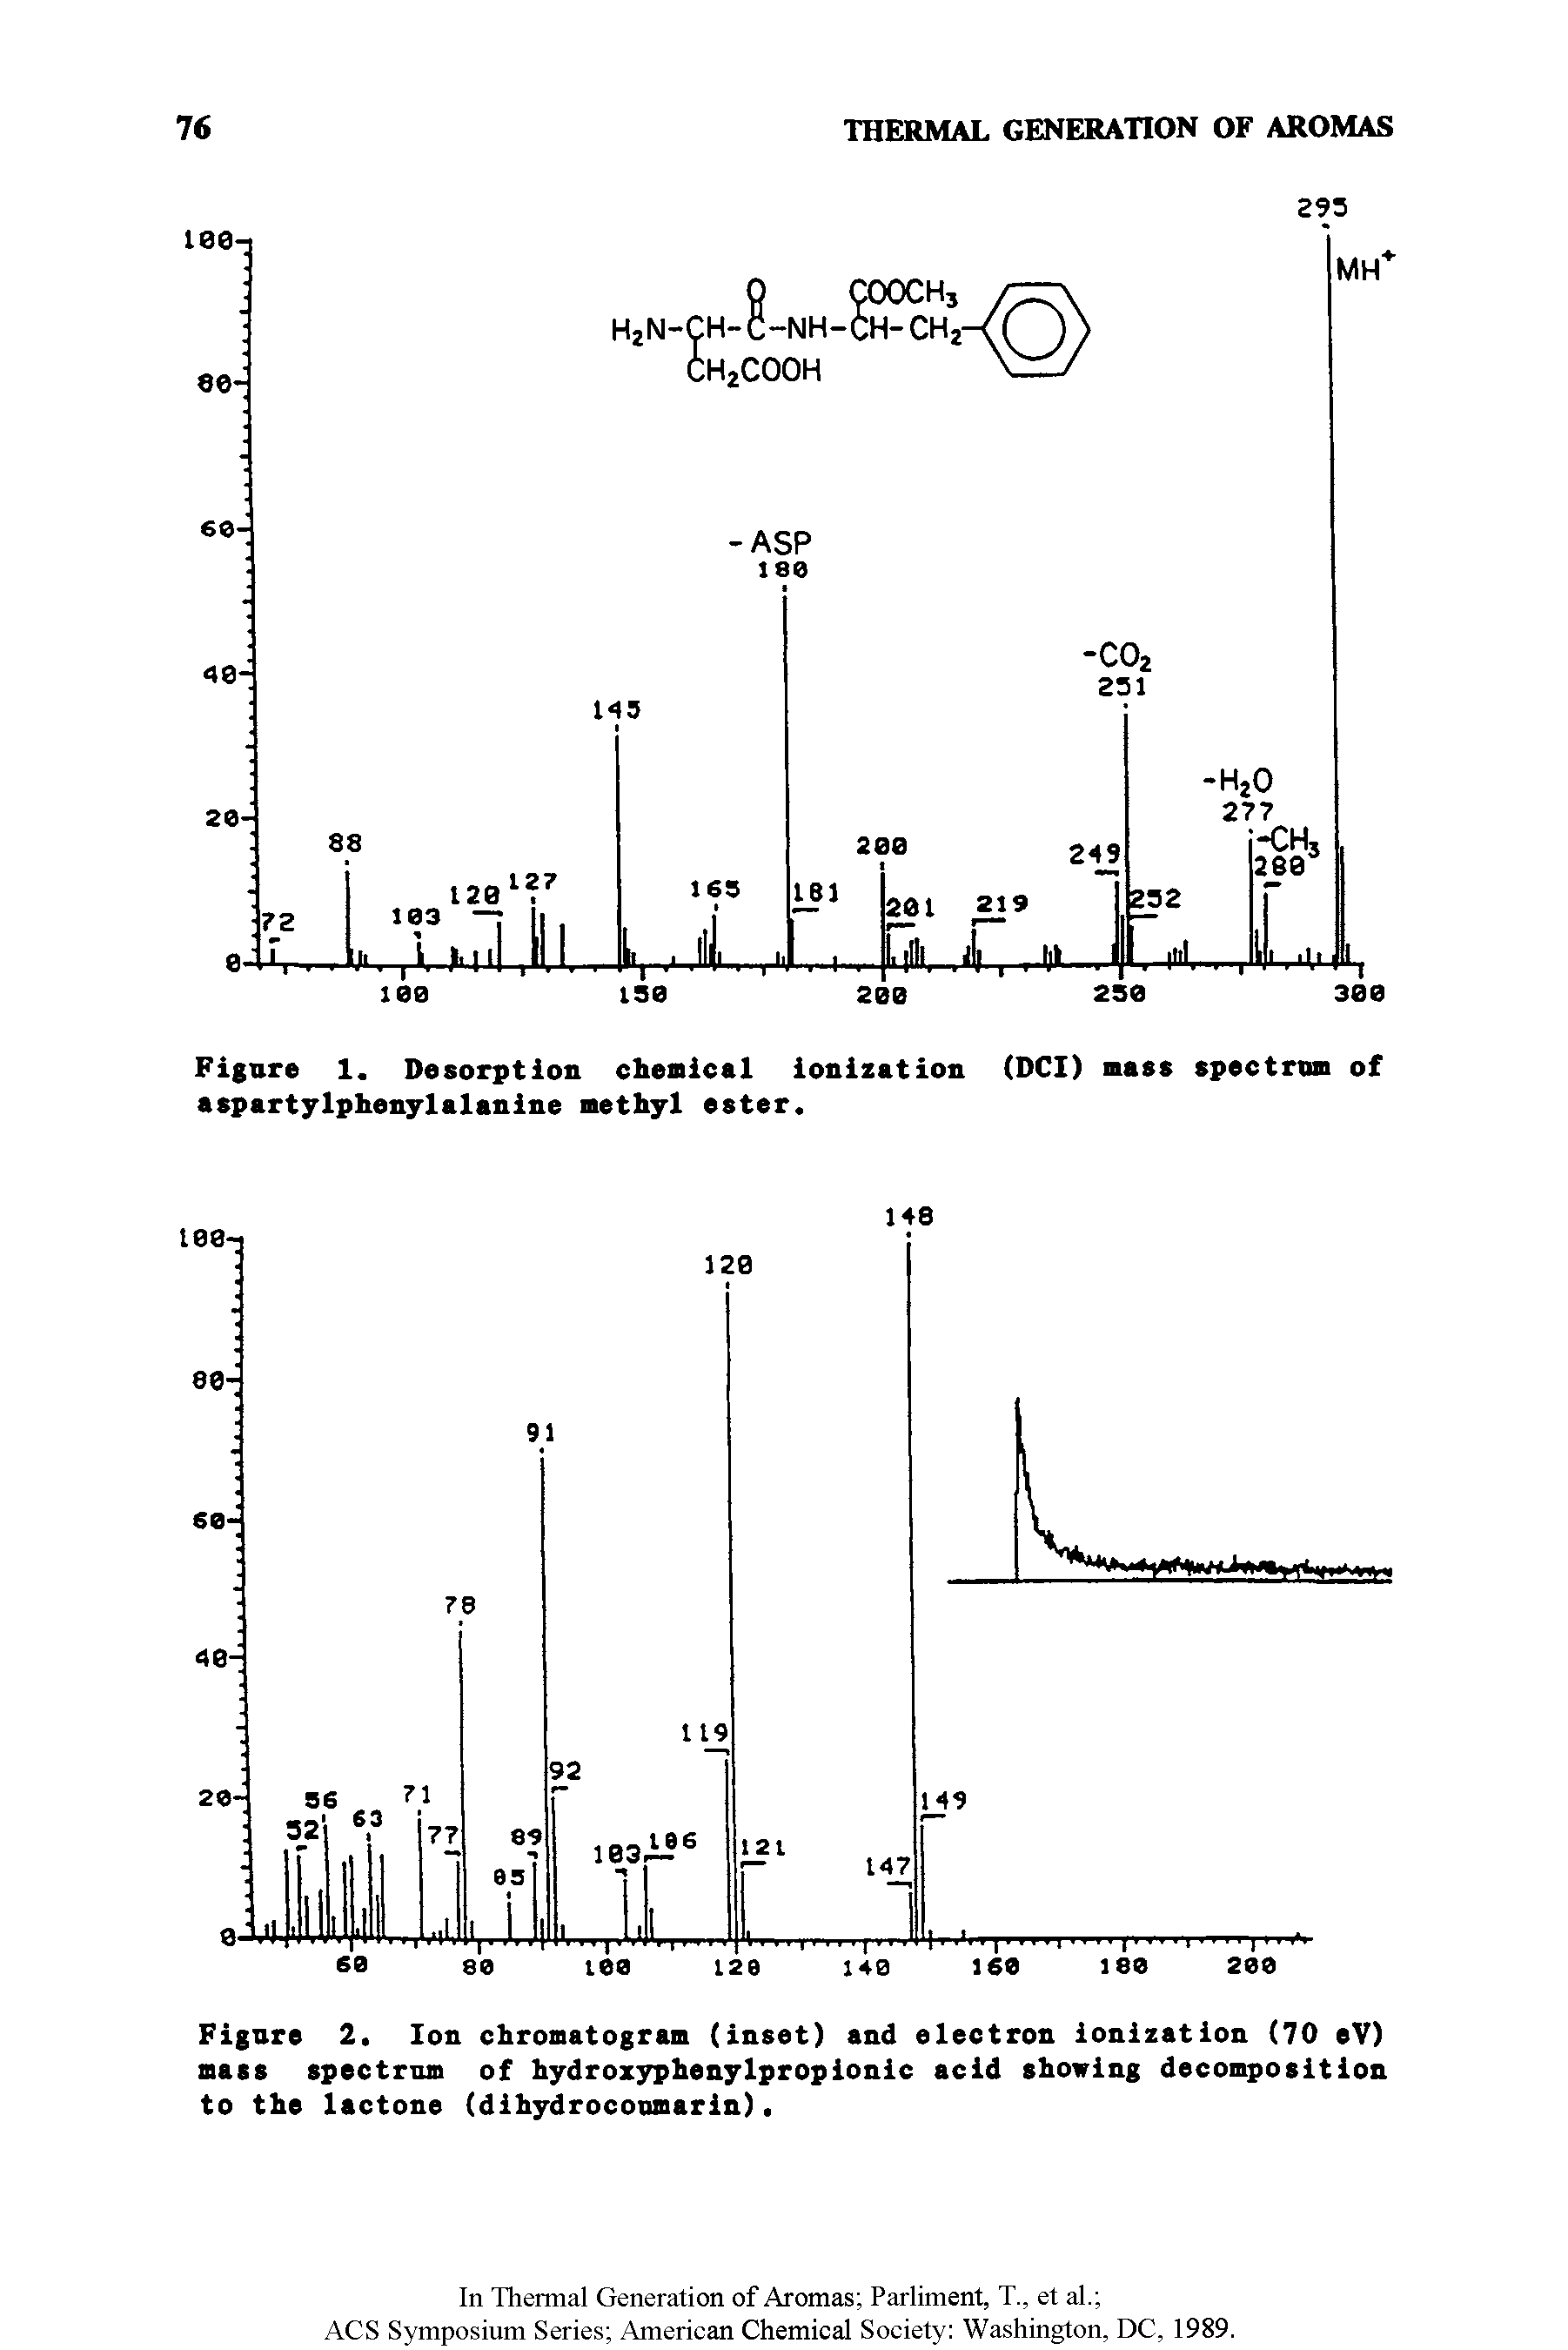 Figure 2. Ion chromatogram (inset) and electron ionization (70 eV) mass spectrum of hydroxyphenylpropionic acid shoving decomposition to the lactone (dihydrocoumarin).